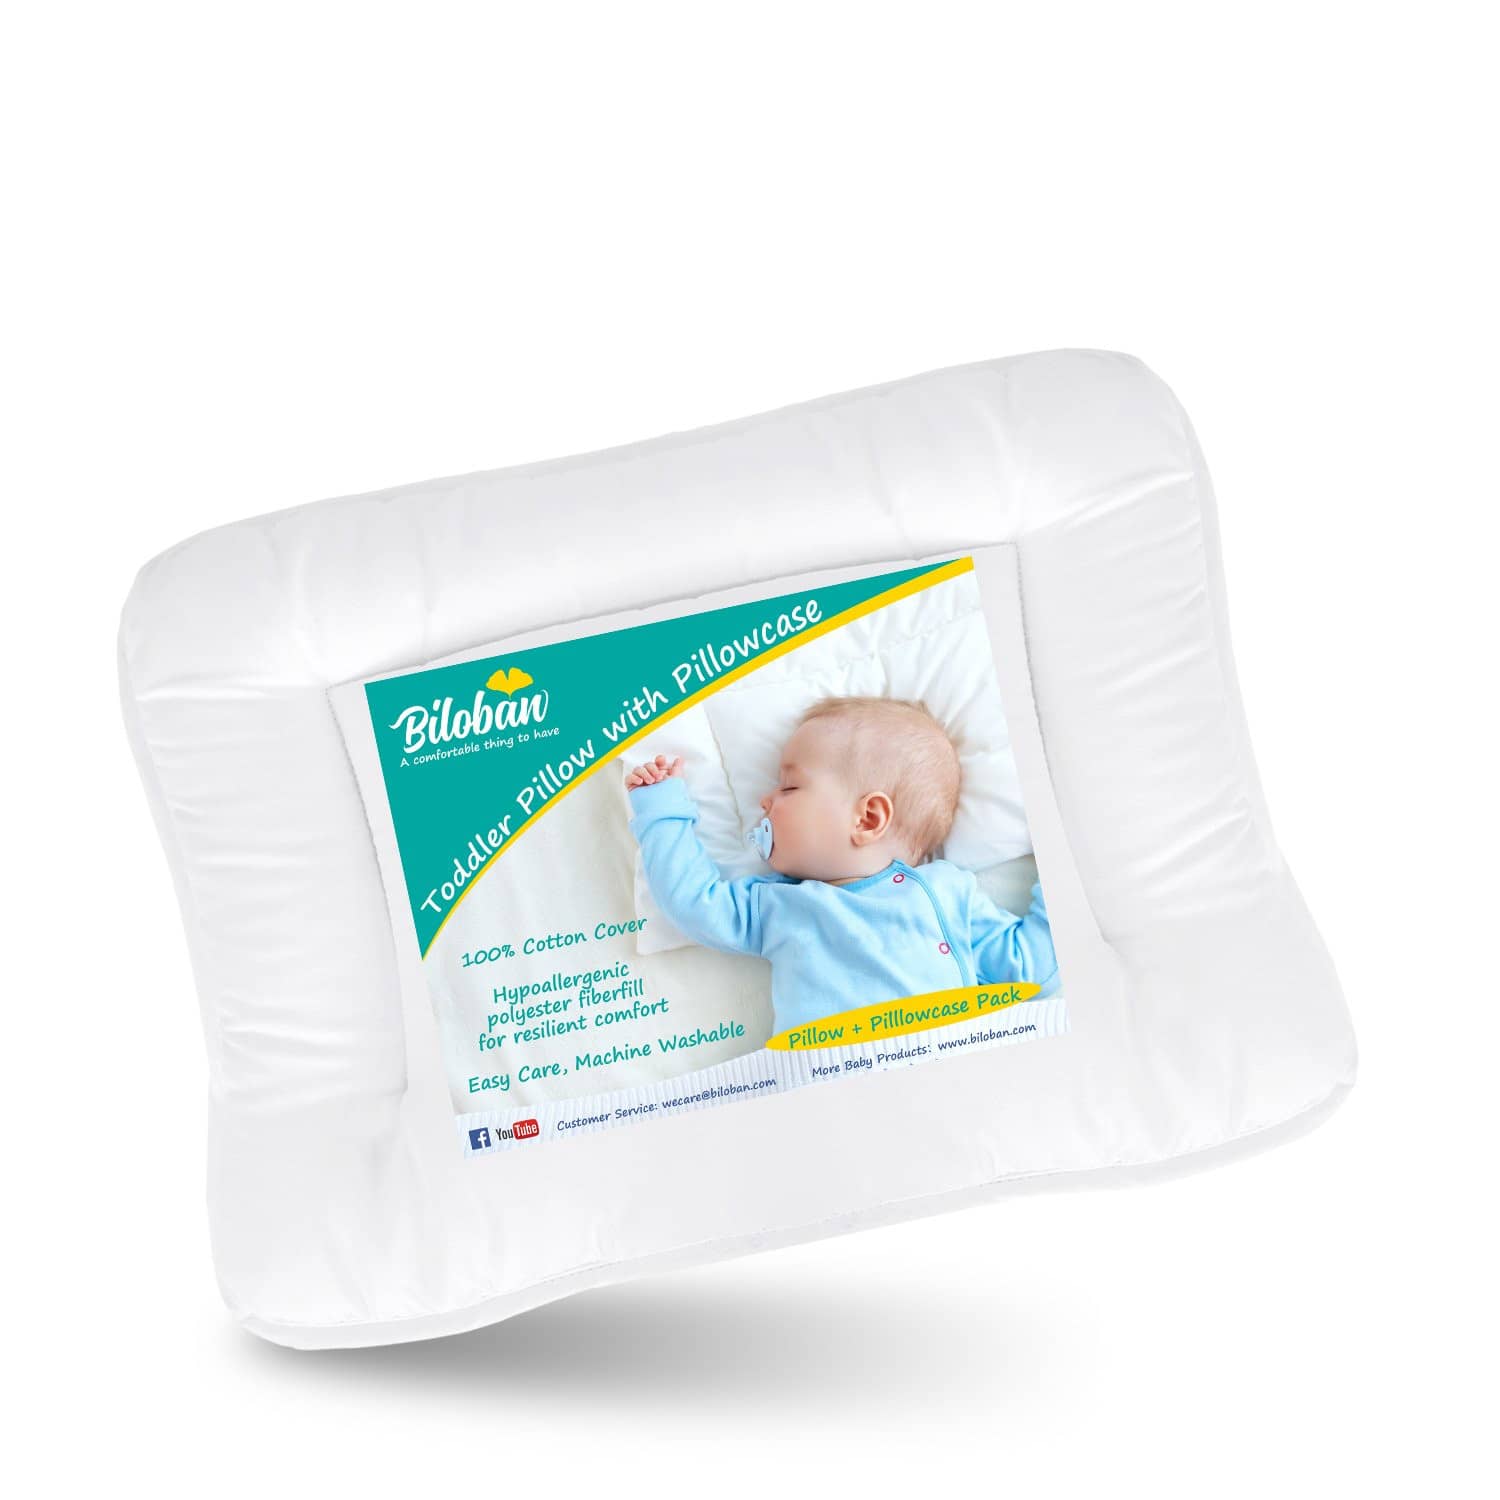 Toddler Pillow Quilted with Pillowcase - 13" x 18", 100% Cotton, Ultra Soft & Breathable - Biloban Online Store